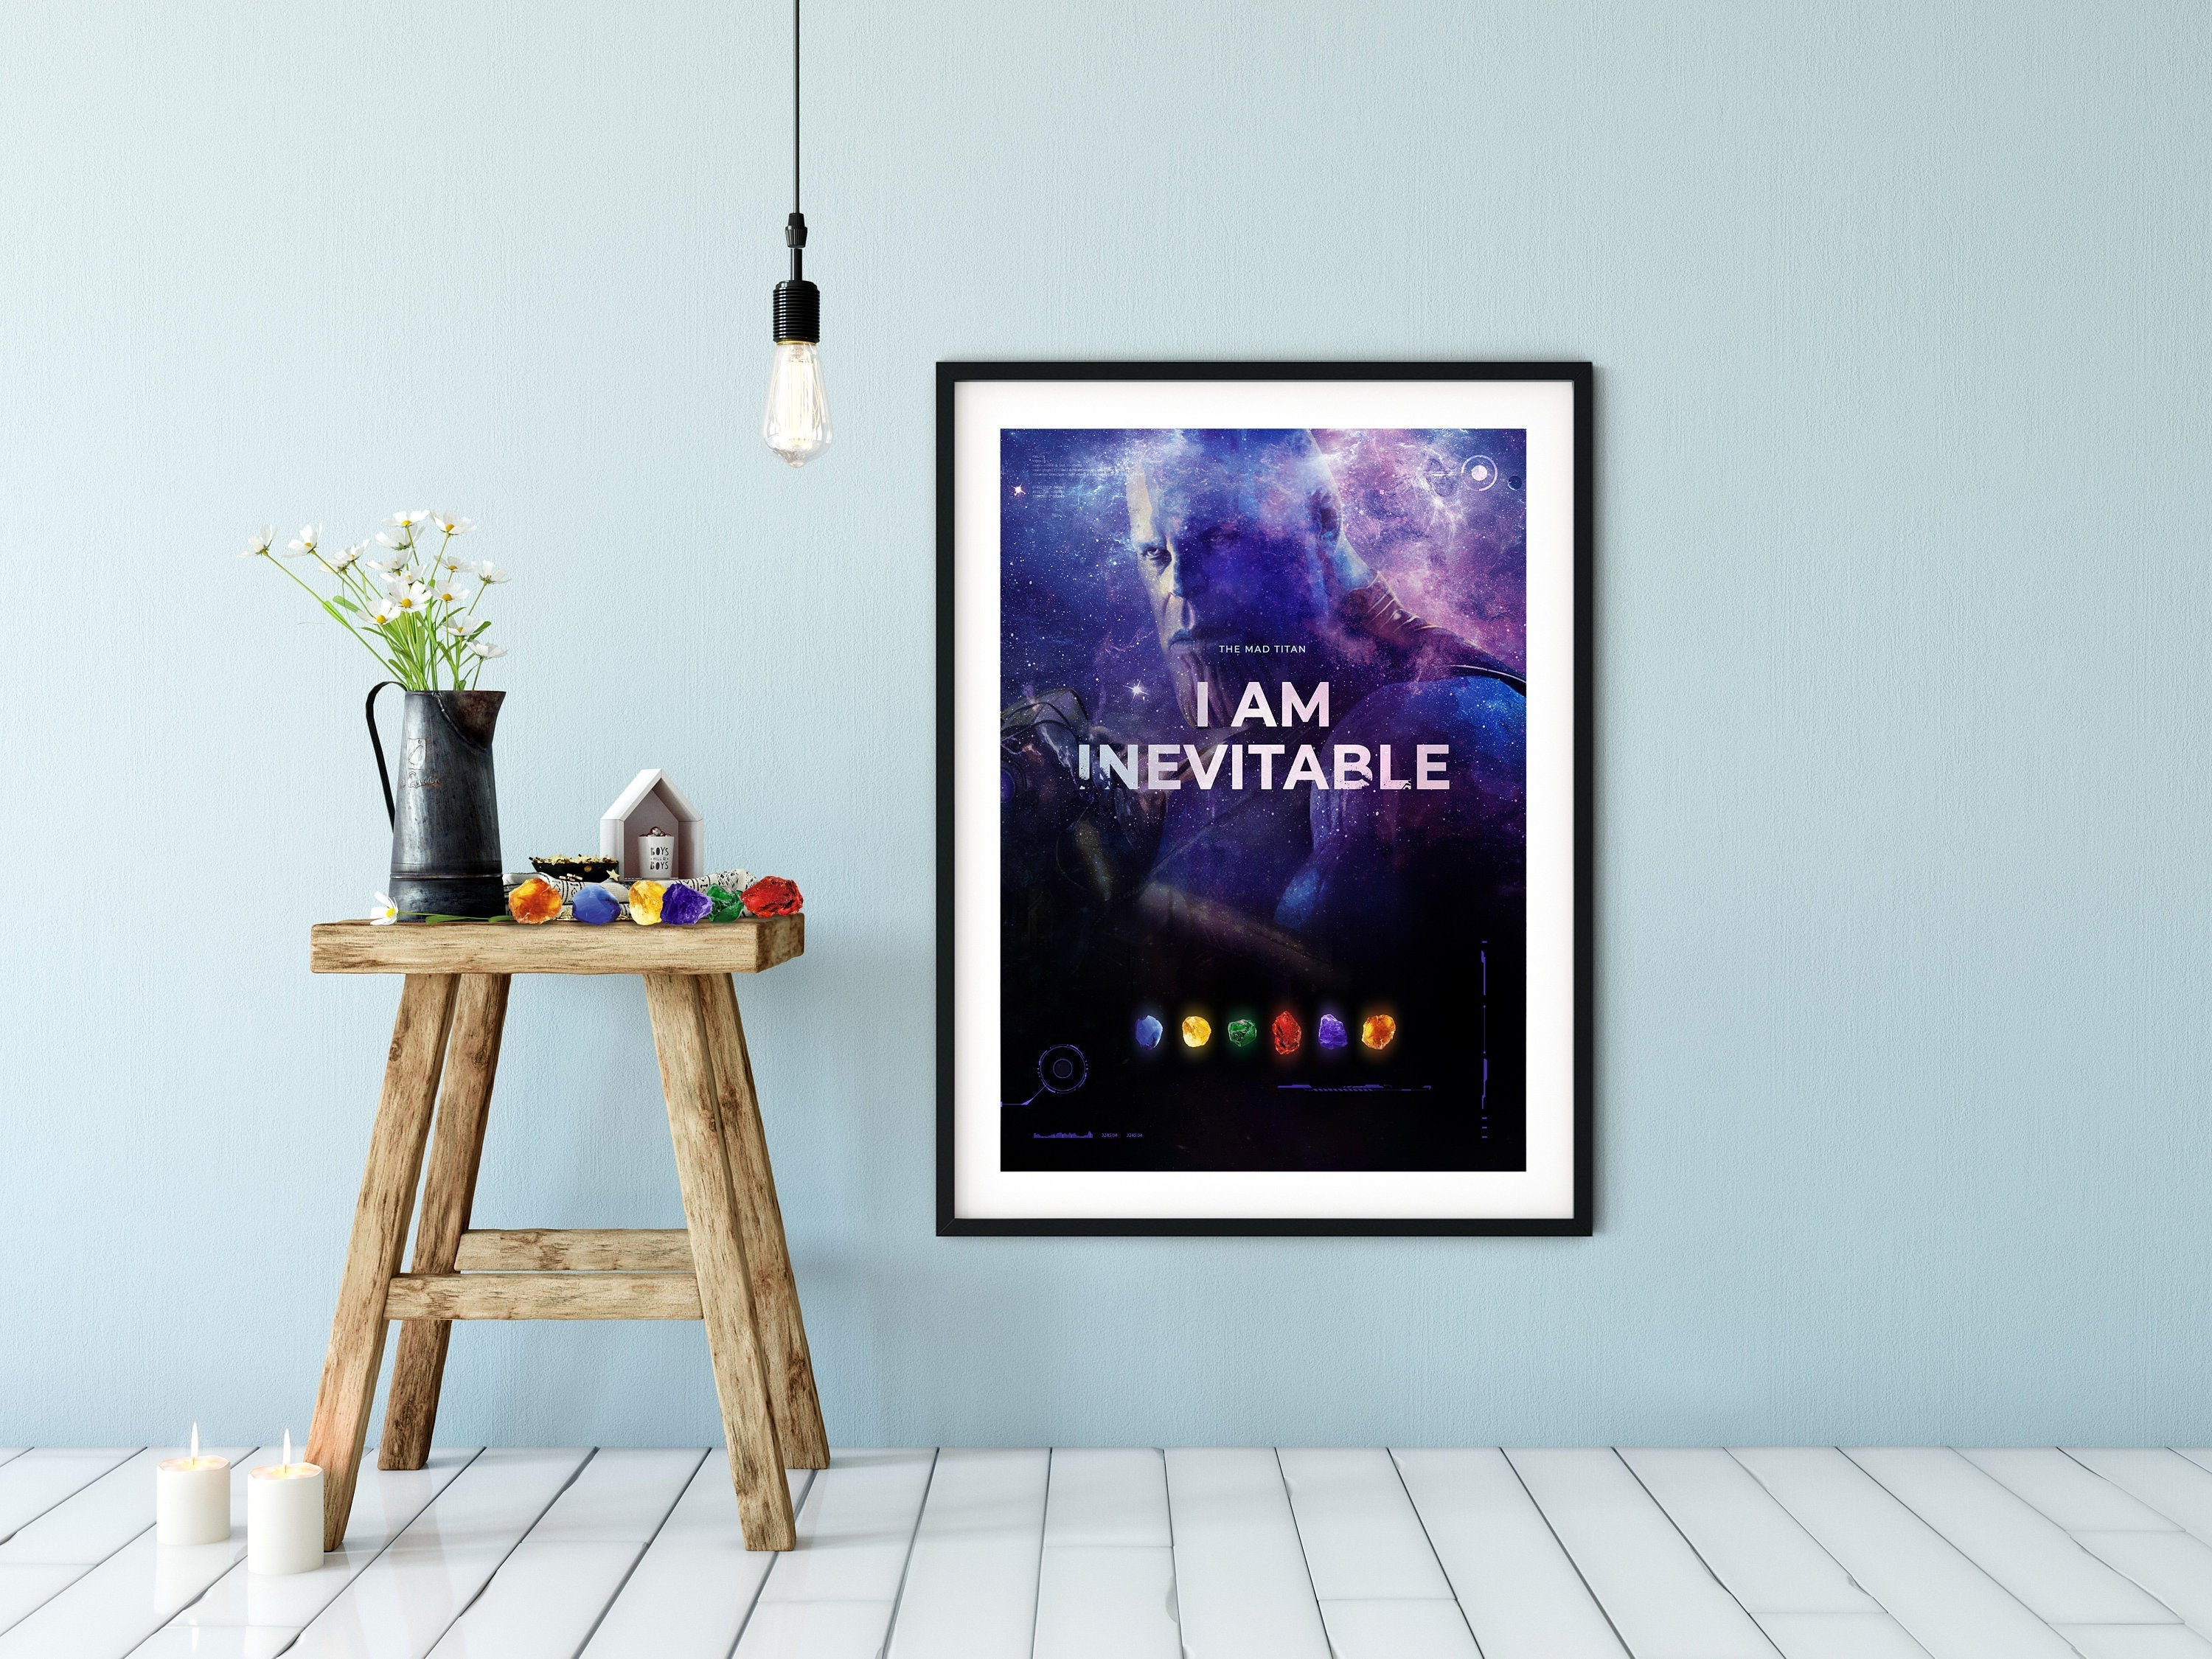 Thanos Marvel Fan Art, Premium Poster, Art Print - Ideal for Game Room  Man Cave  Office  Kids Bedroom - Size A3 A2 - Cool gift idea